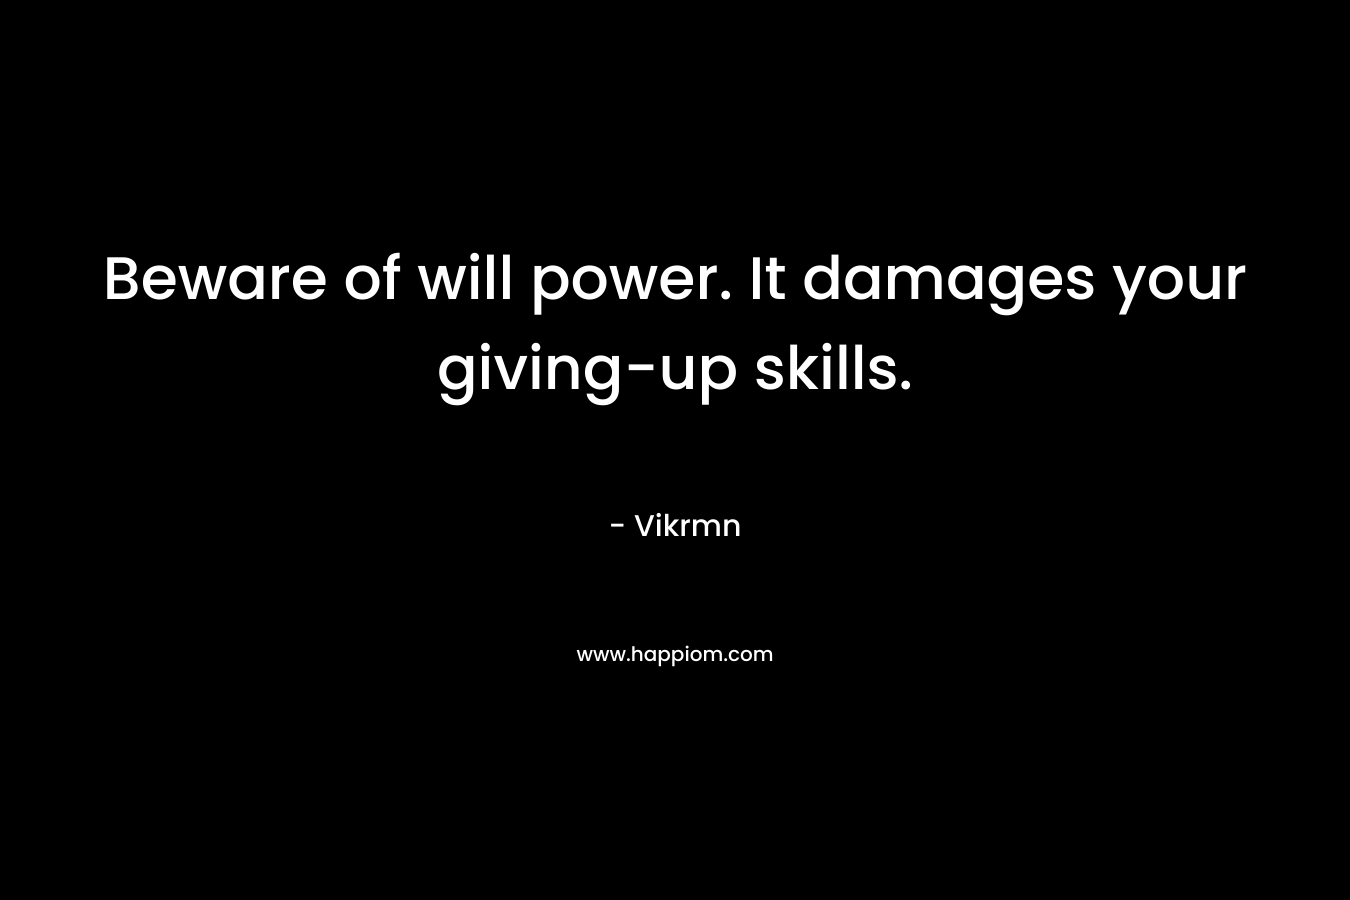 Beware of will power. It damages your giving-up skills. – Vikrmn